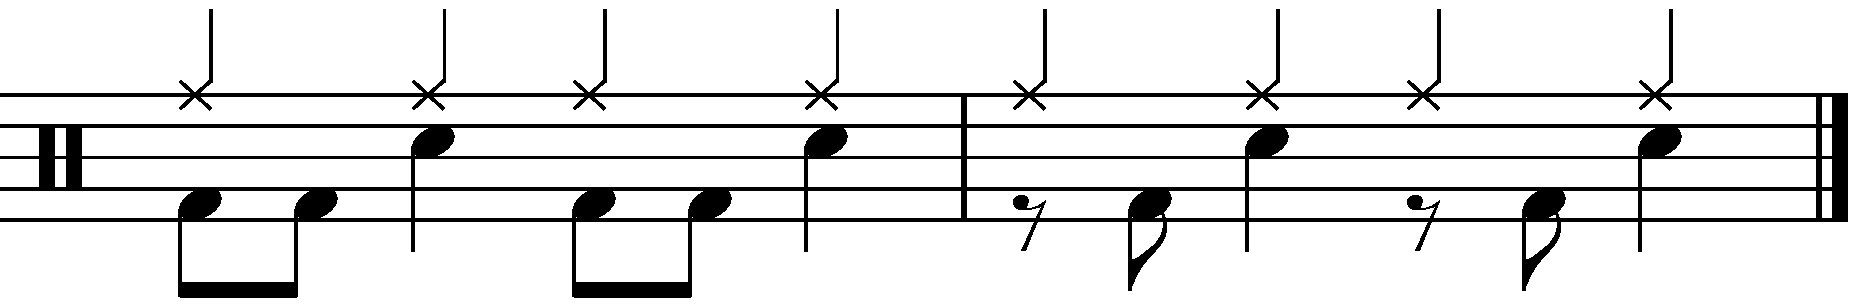 2 Bar Grooves - Example 2d